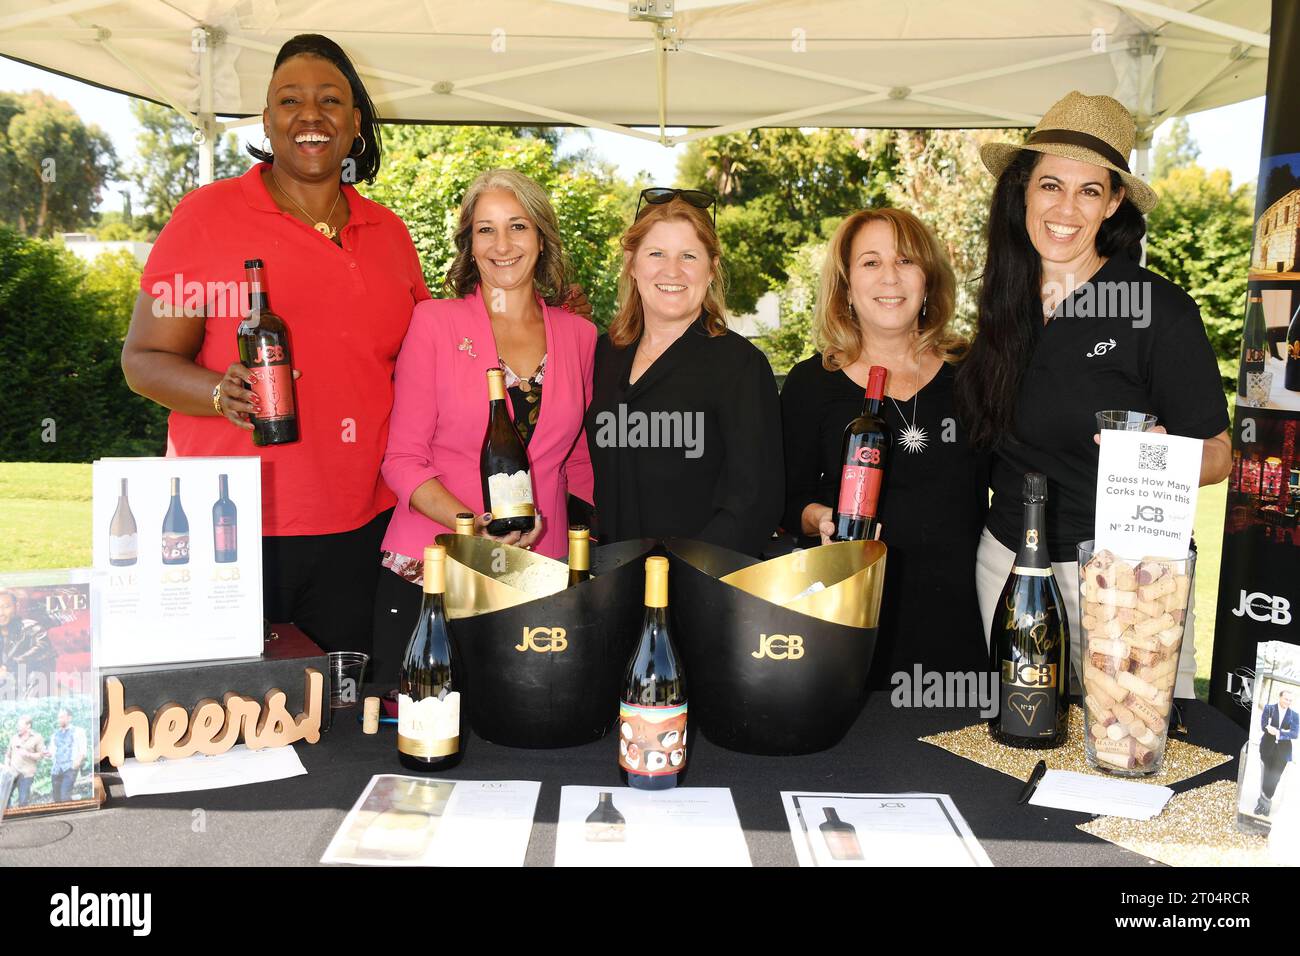 TARZANA, CALIFORNIA - OCTOBER 02: (L-R) Patti-Anne Tarlton, Nurit Siegel Smith and guests attend the Music Forward Foundation Golf Classic at El Cabal Stock Photo